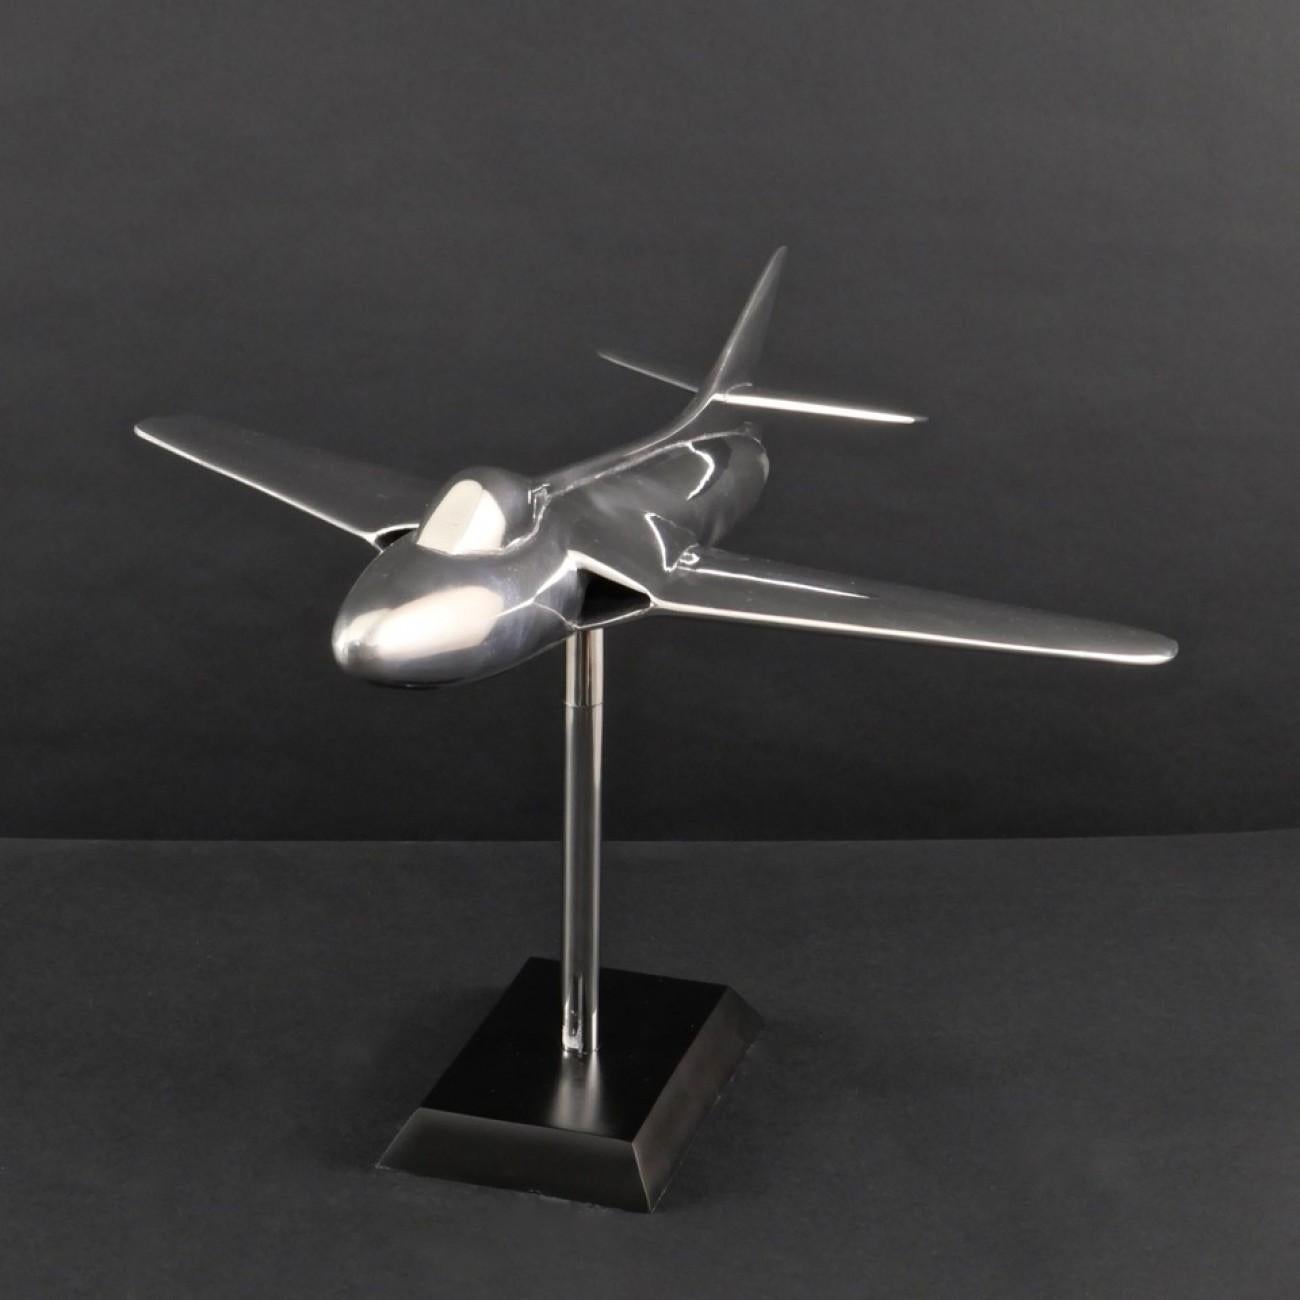 Wonderful cast aluminum scale model of a Hawker Hunter fighter jet on original Stand, made for the Air Ministry in the 1950s. The aircraft was originally painted, but the condition of the finish was beyond restoration so it has been stripped and